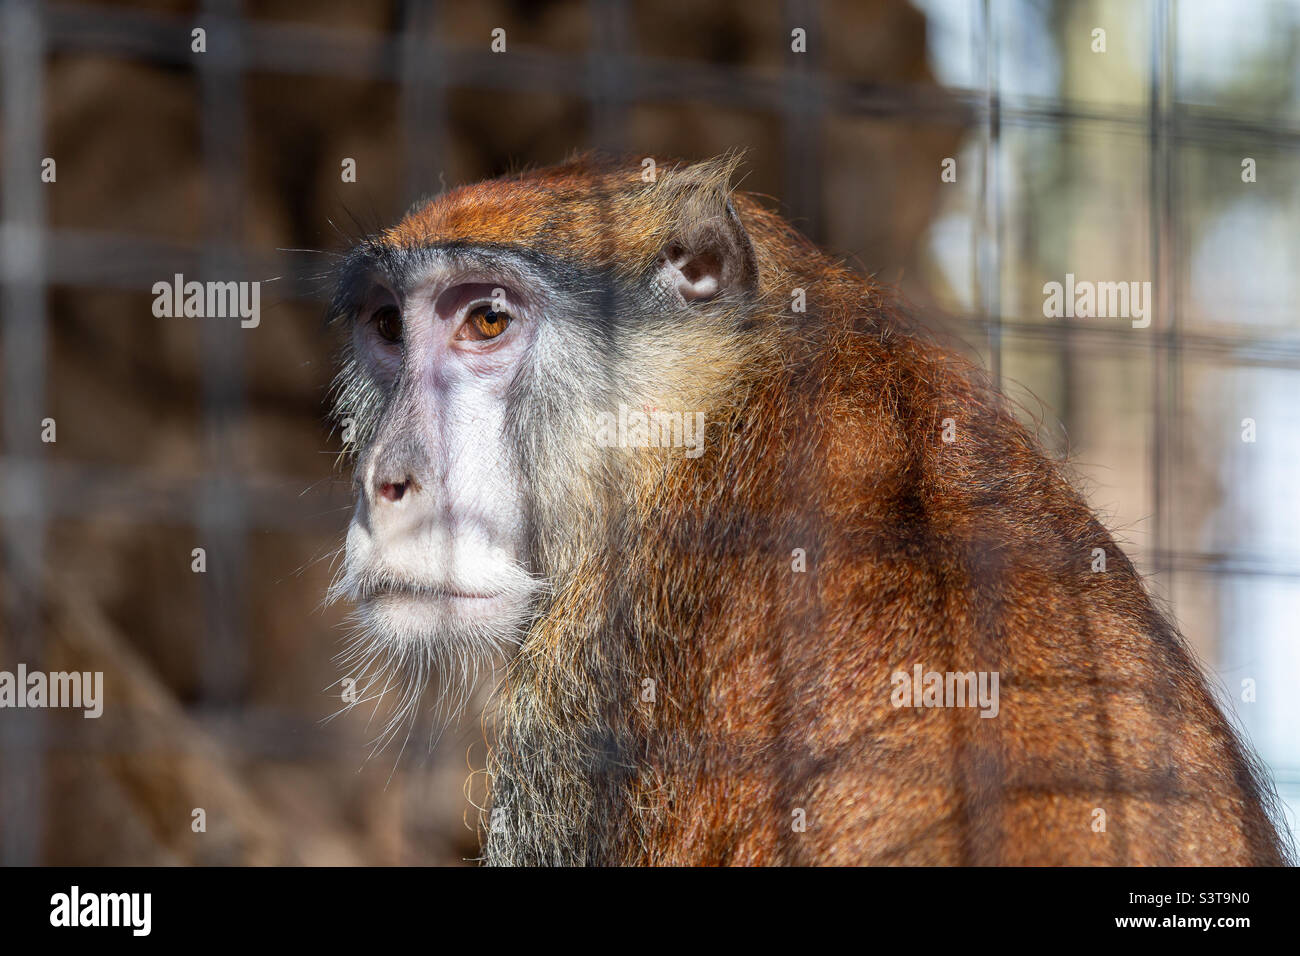 Sad looking monkey portrait in the zoo in the cage Stock Photo